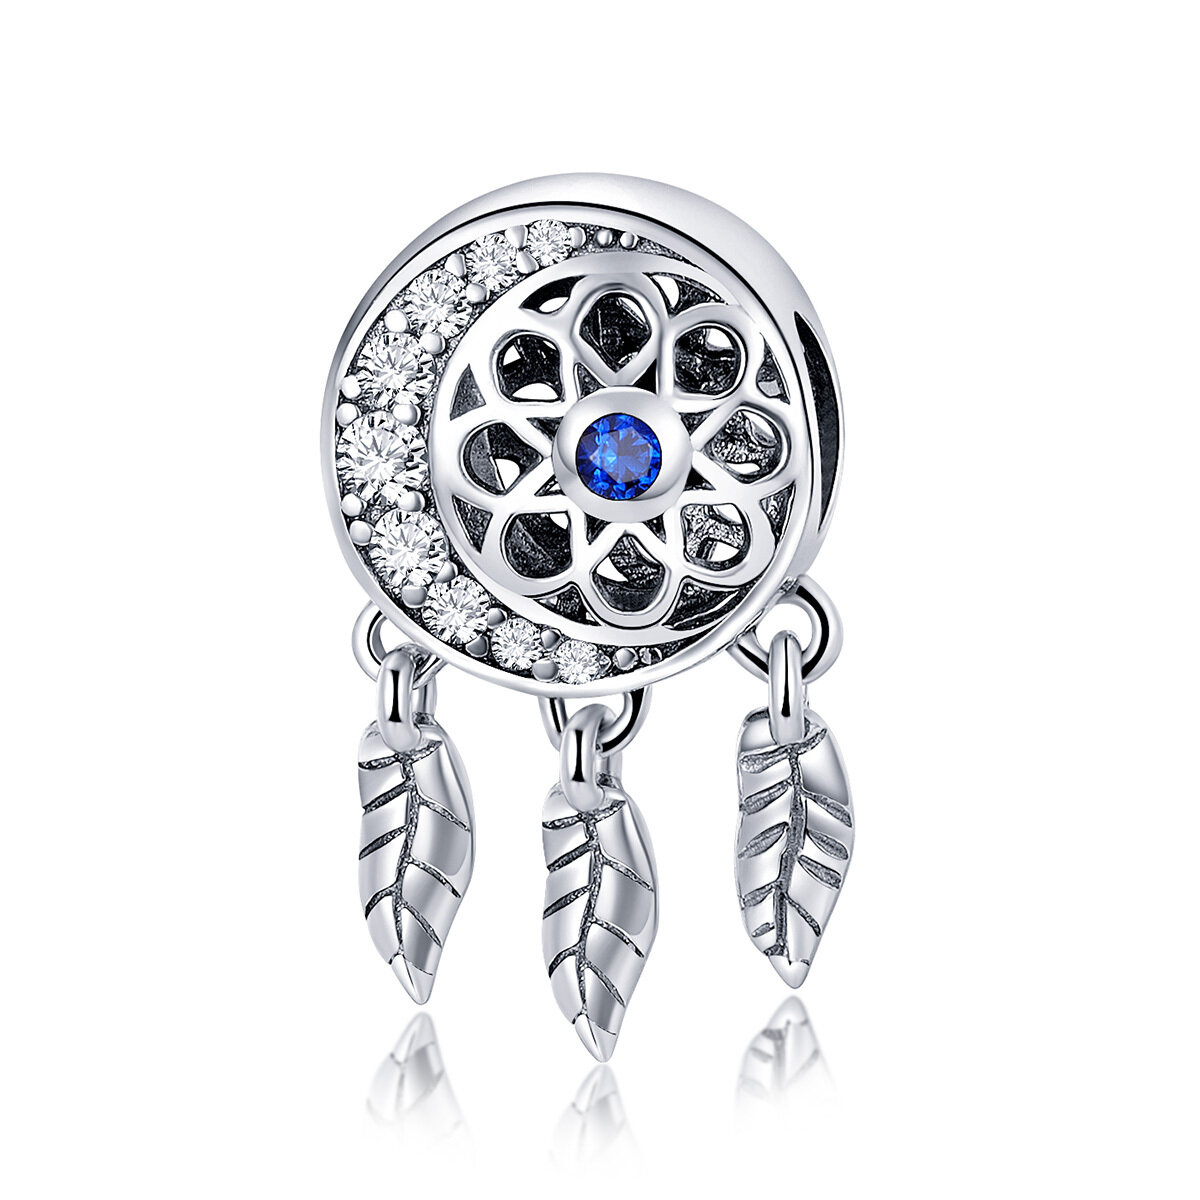 GemKing SCC718 the Dream Catcher S925 Sterling Silver Charm